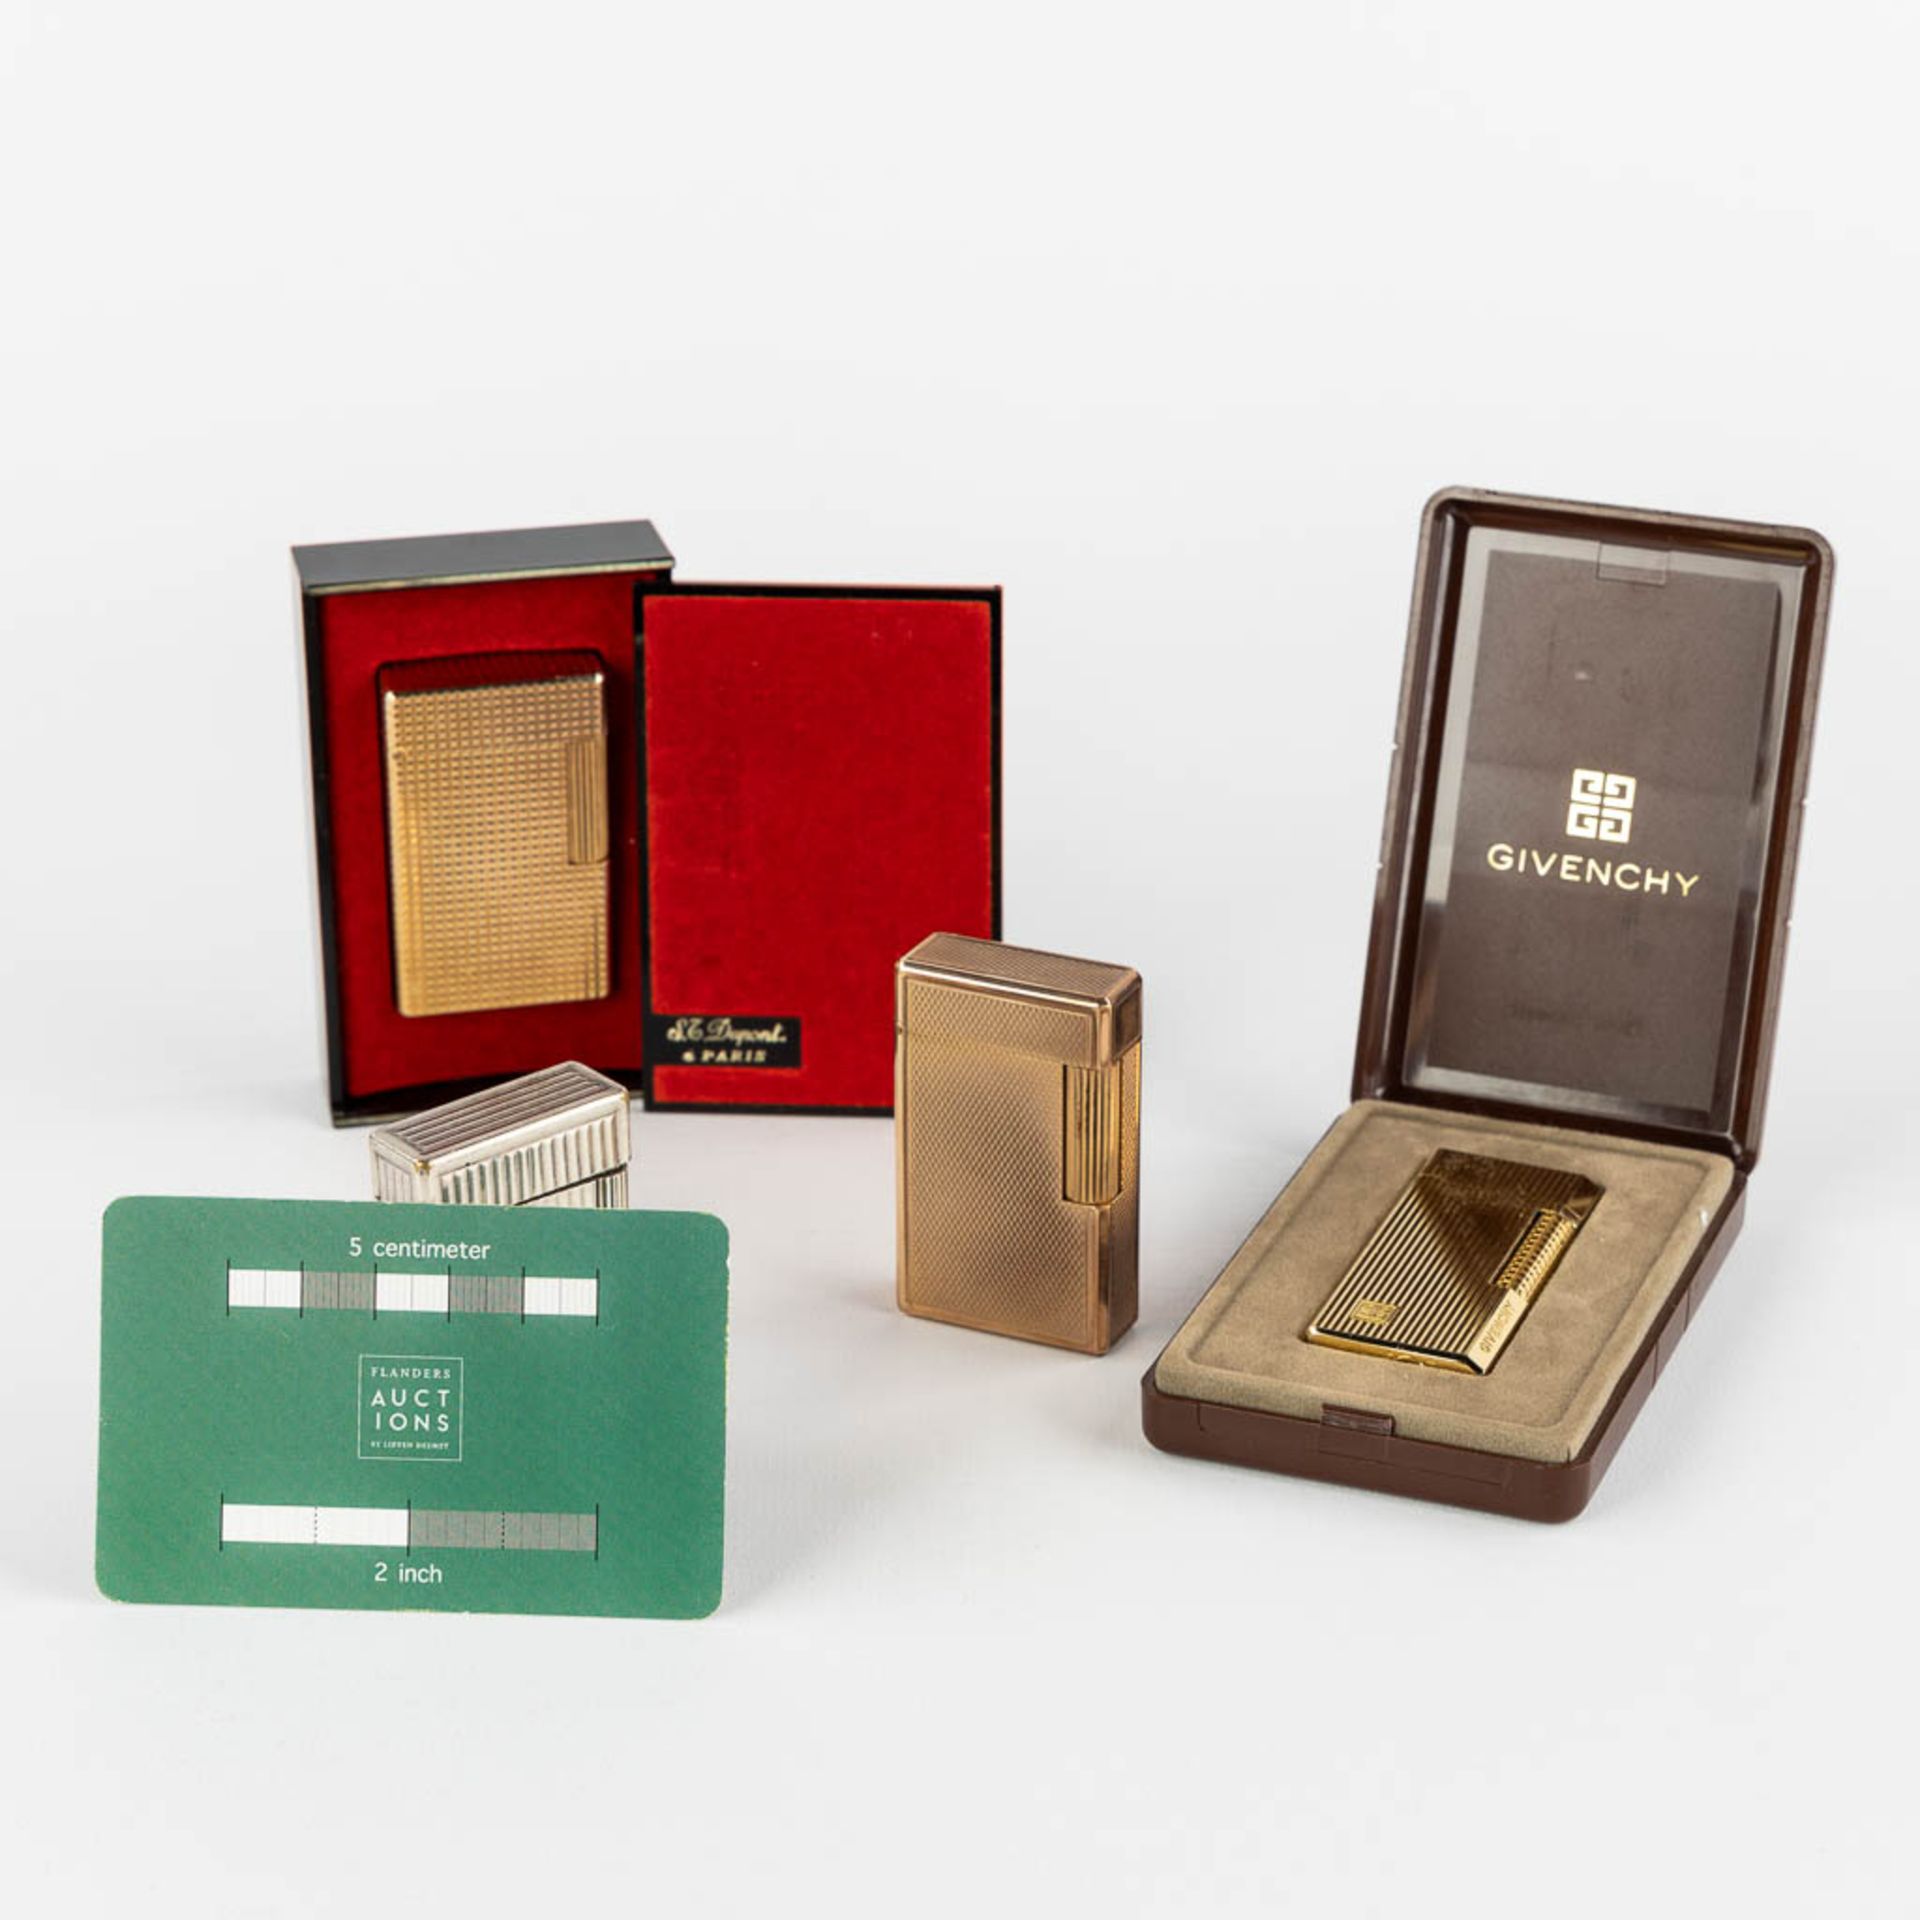 ST. Dupont, Three gold and silver plated lighters, added a Givency lighter. (L:1 x W:3,5 x H:6 cm) - Bild 2 aus 14